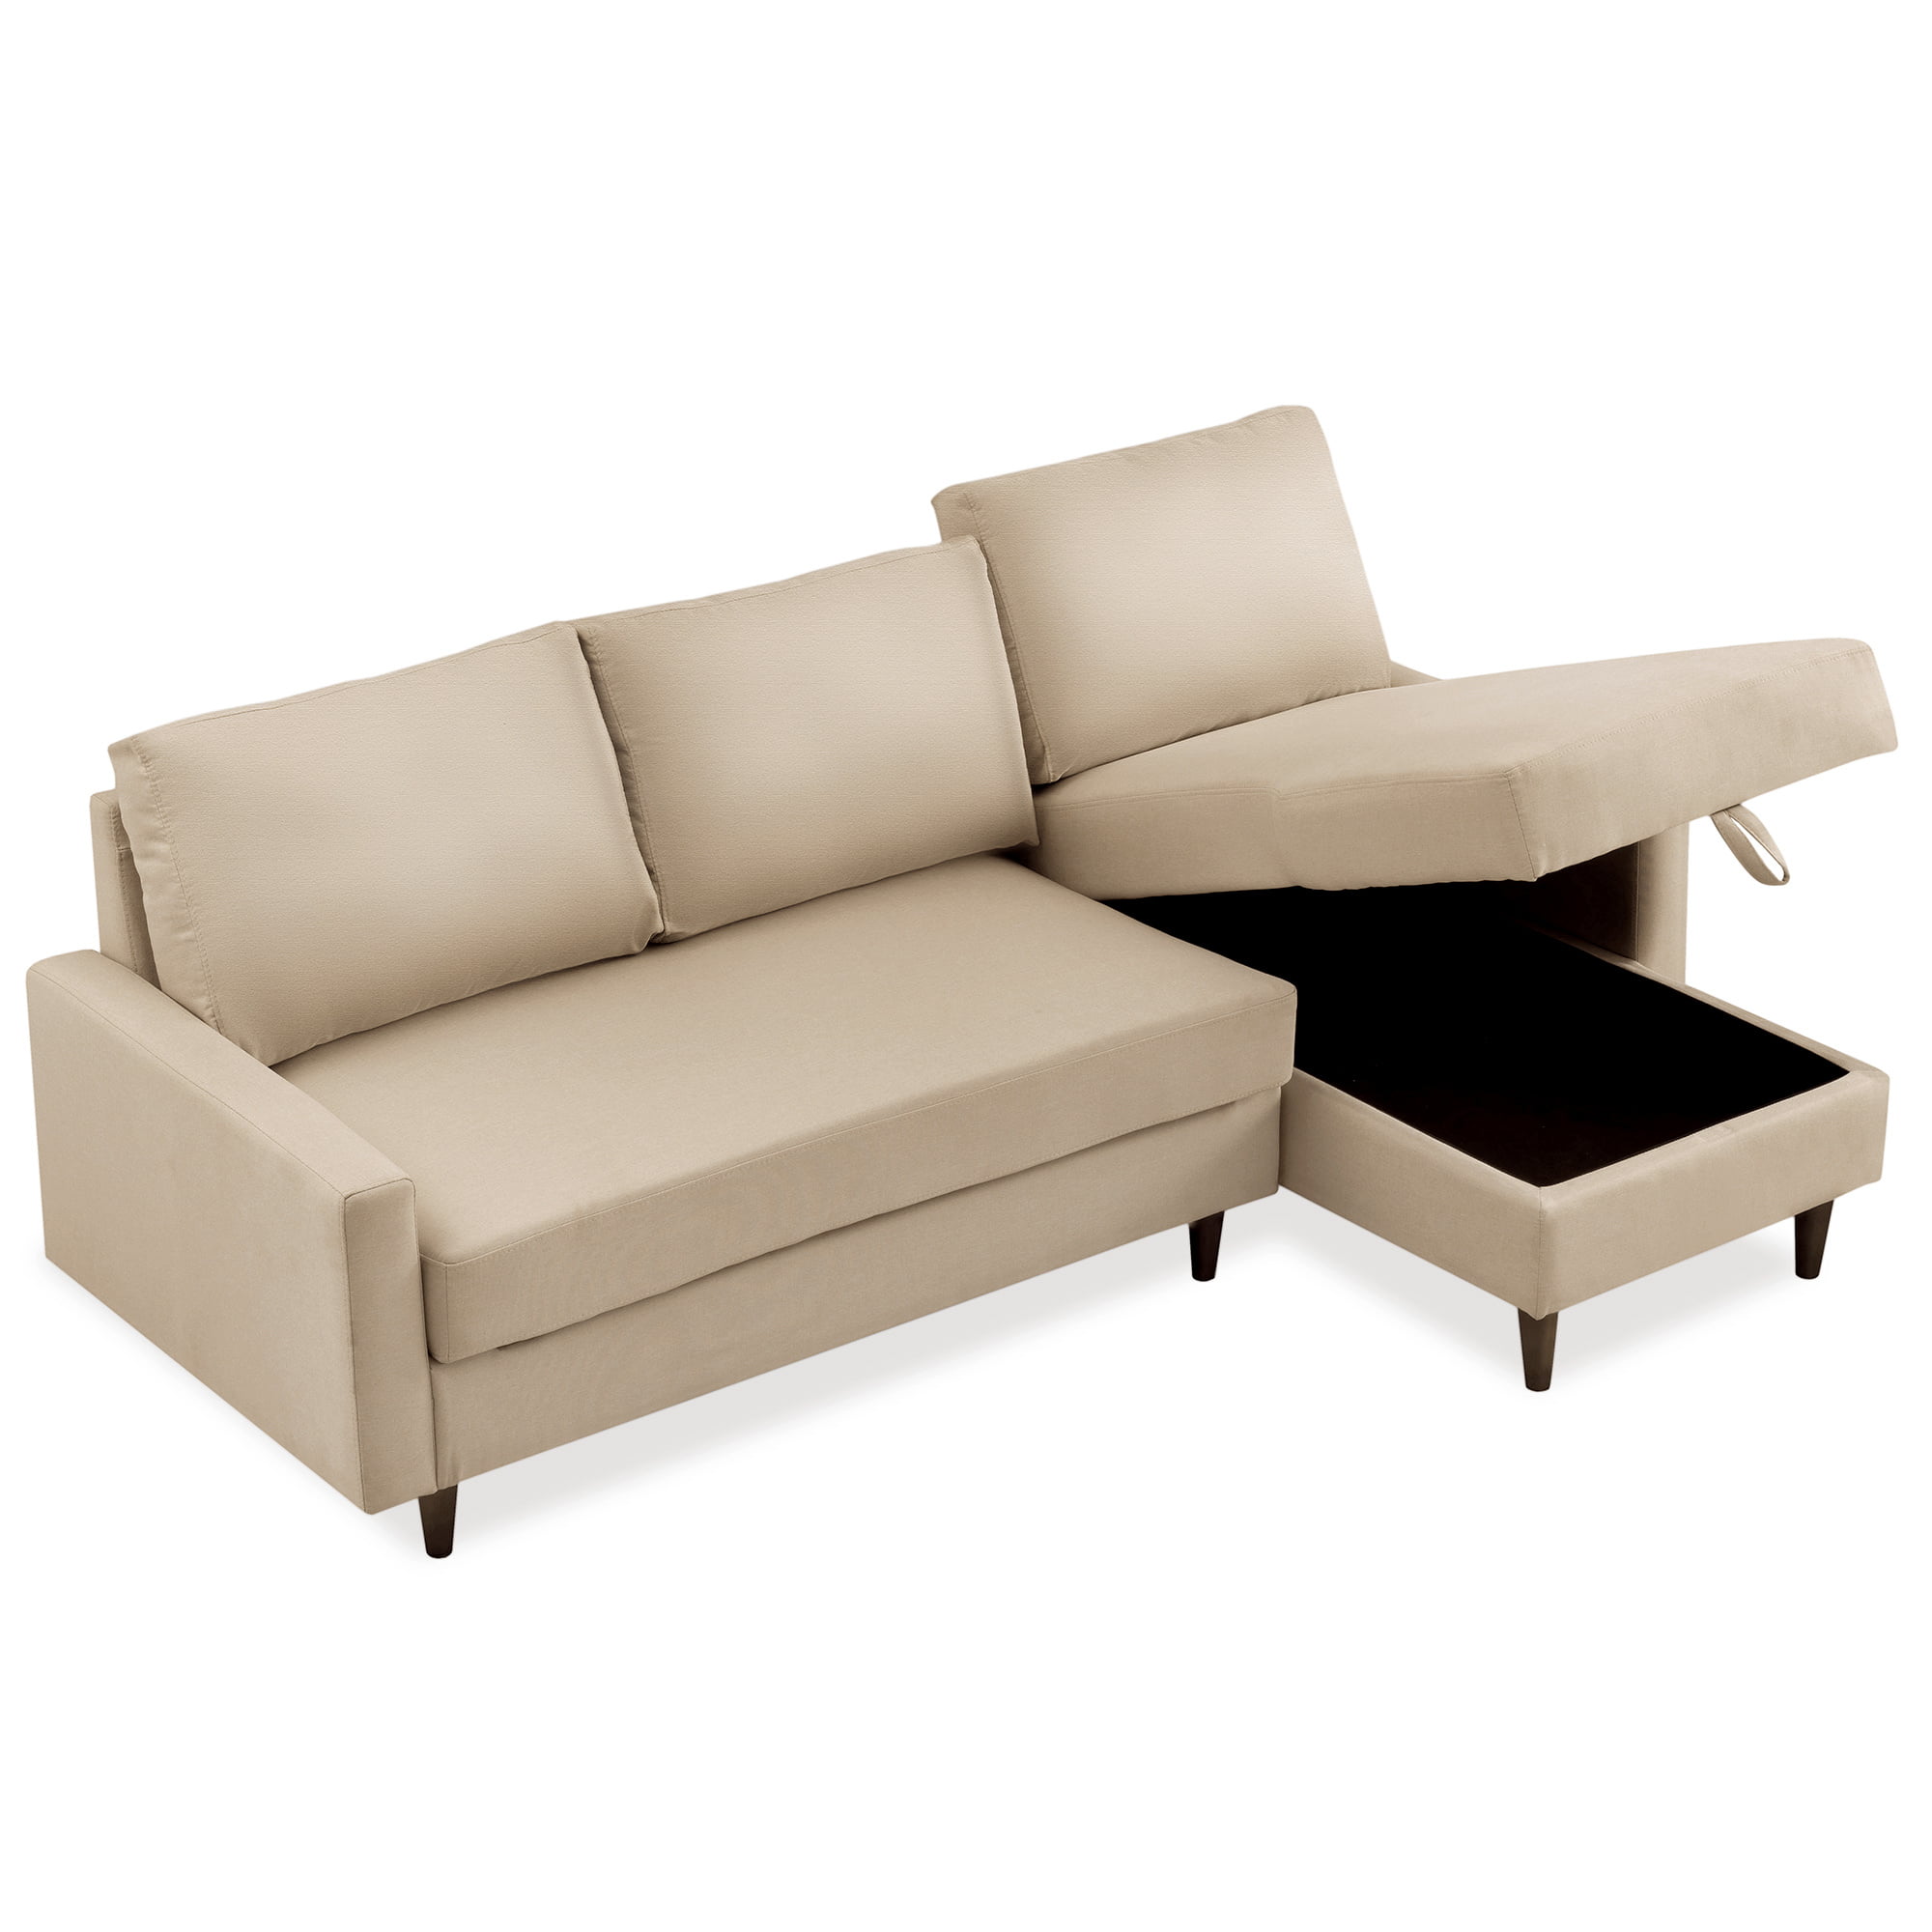 84 50 5 35 Pull Out Sleeper Sectional, 3 Seater Pull Out Sofa Bed With Storage